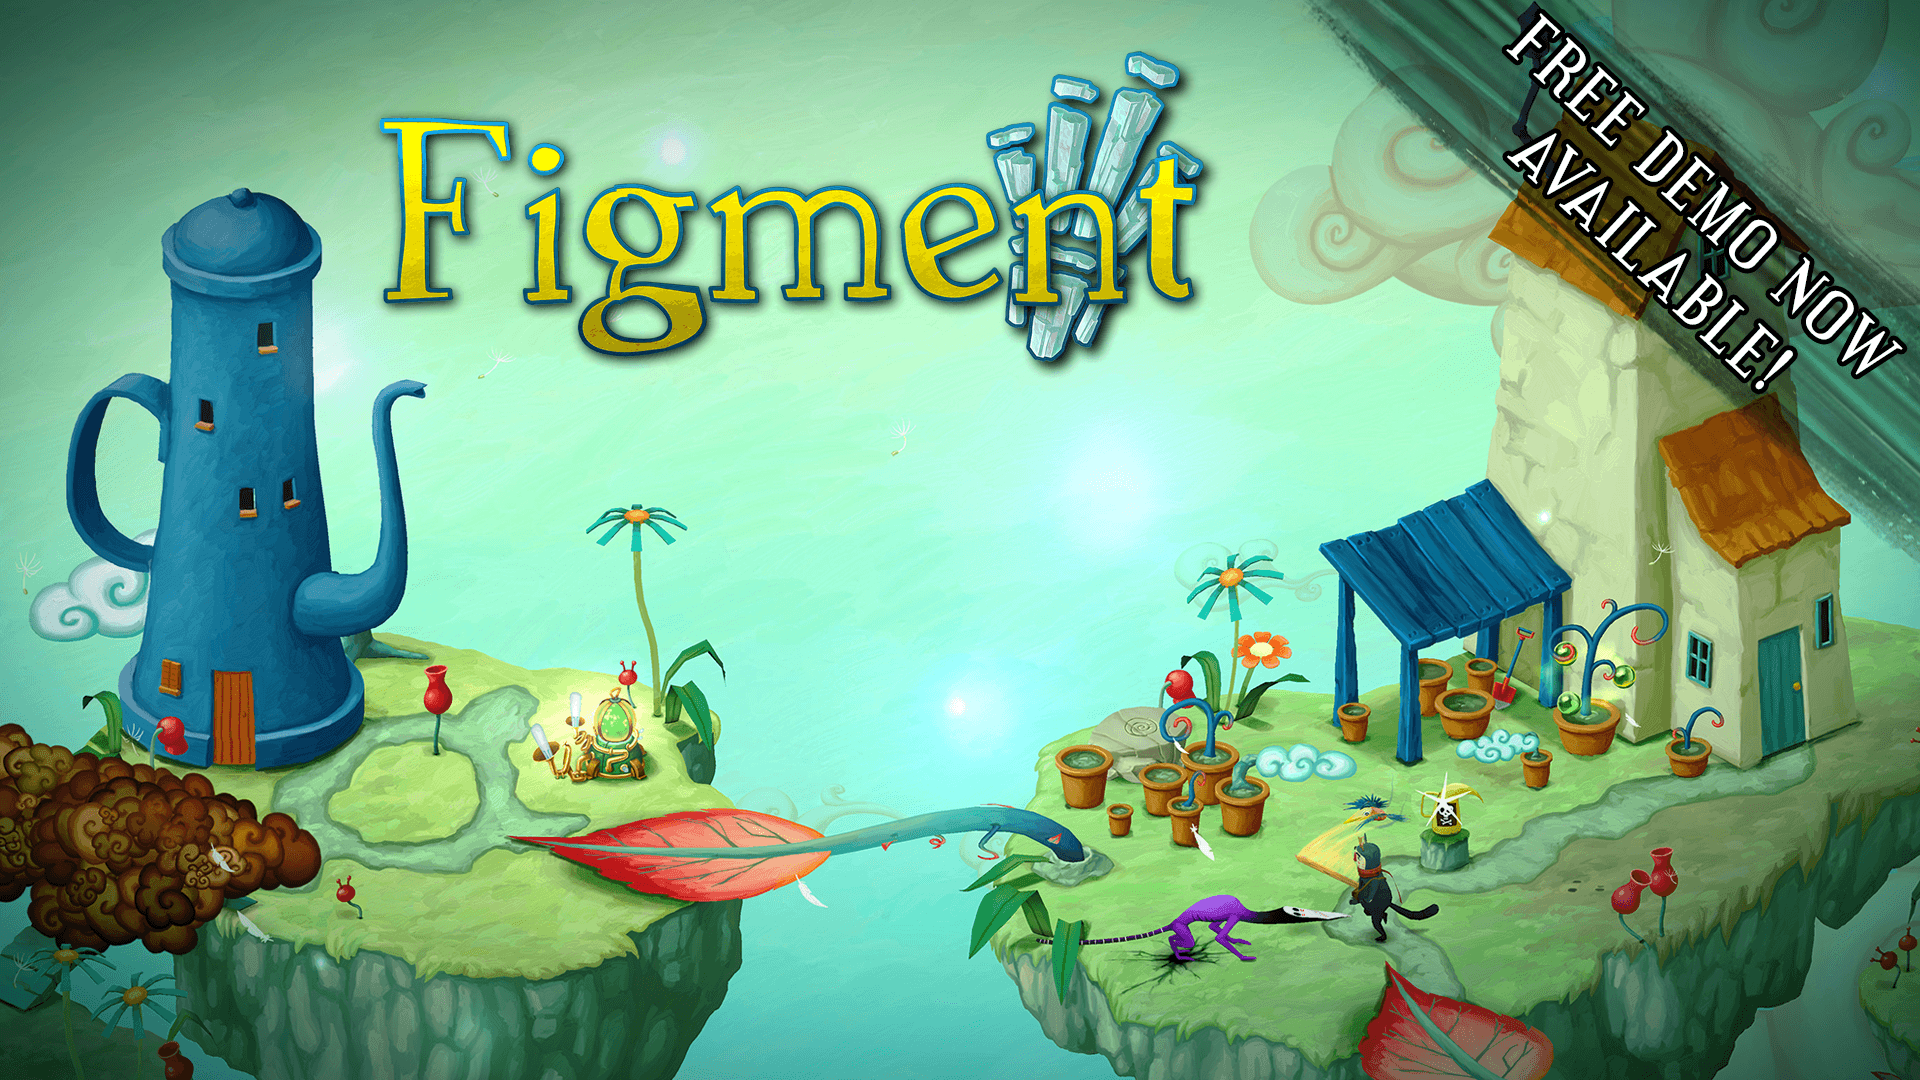 A free Figment demo is now available on Steam